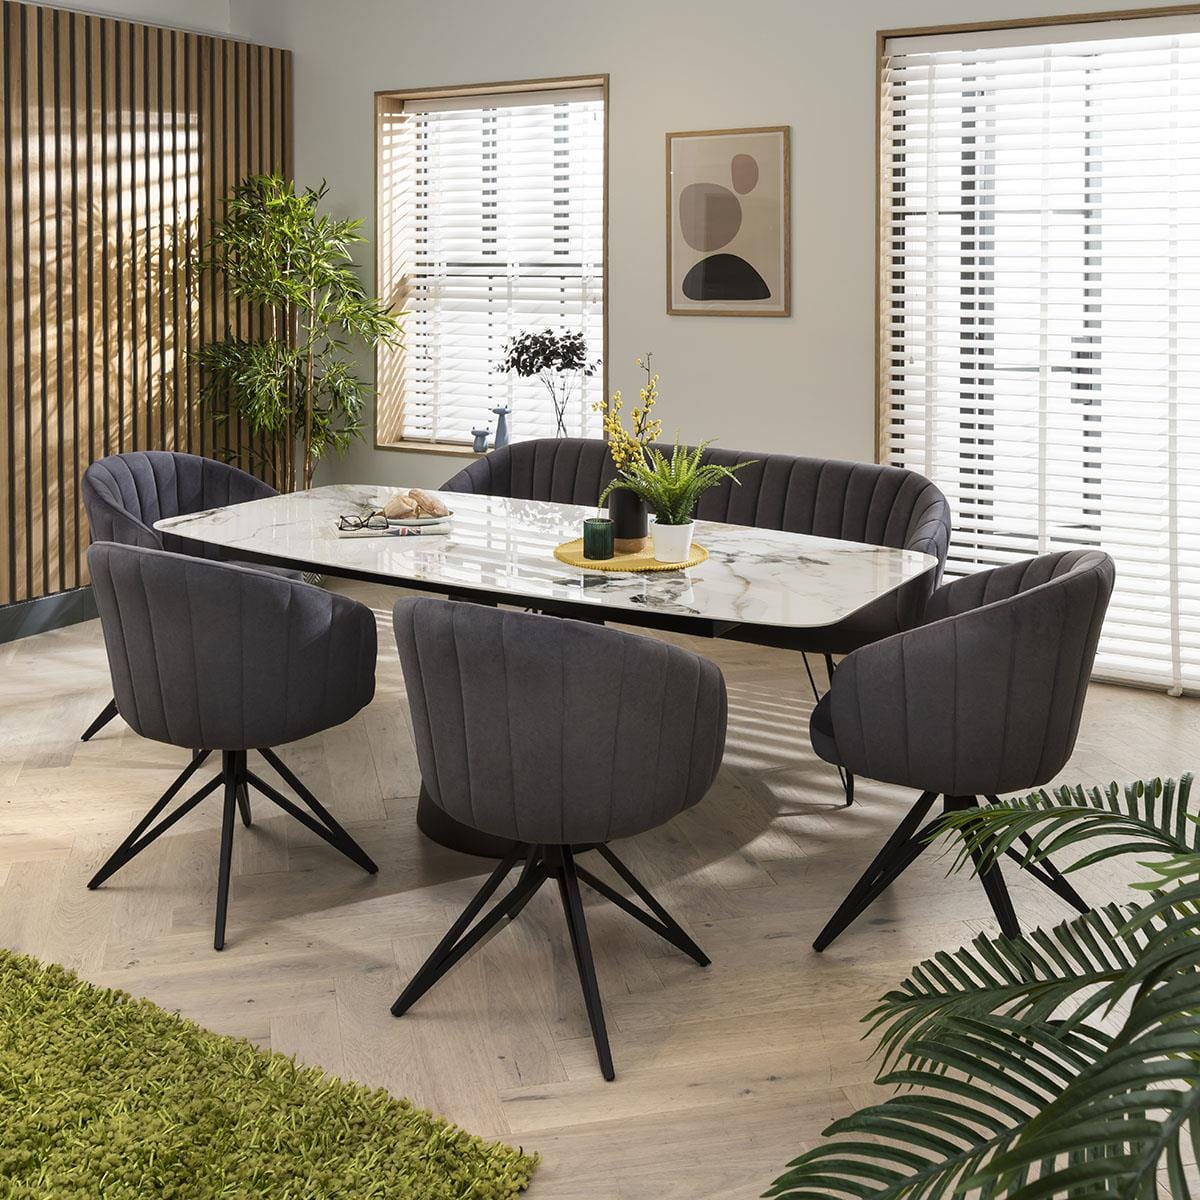 Quatropi 6 Seater Modern Bench Dining Set With Grey Chairs - Ceramic Marble Dining Table